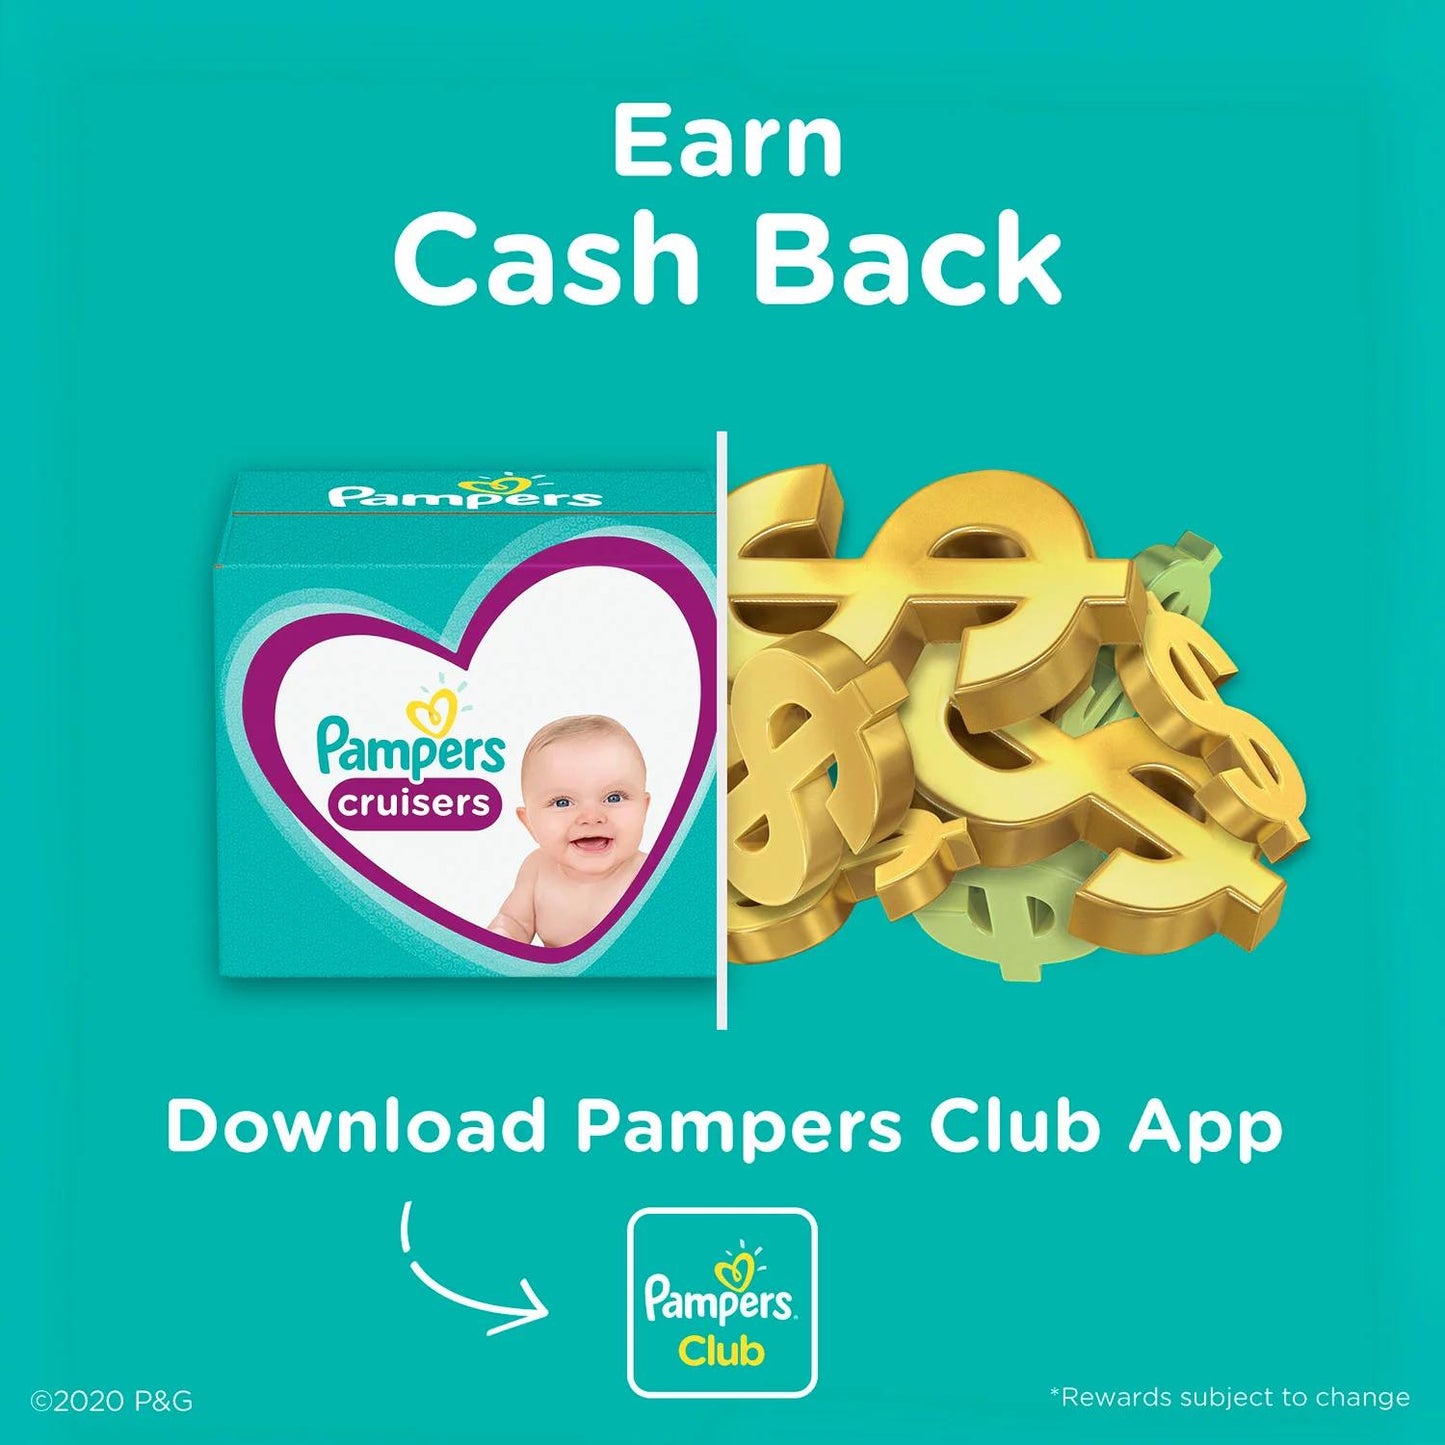 Pampers Cruisers Stay-Put Fit Diapers (Sizes:3-7)